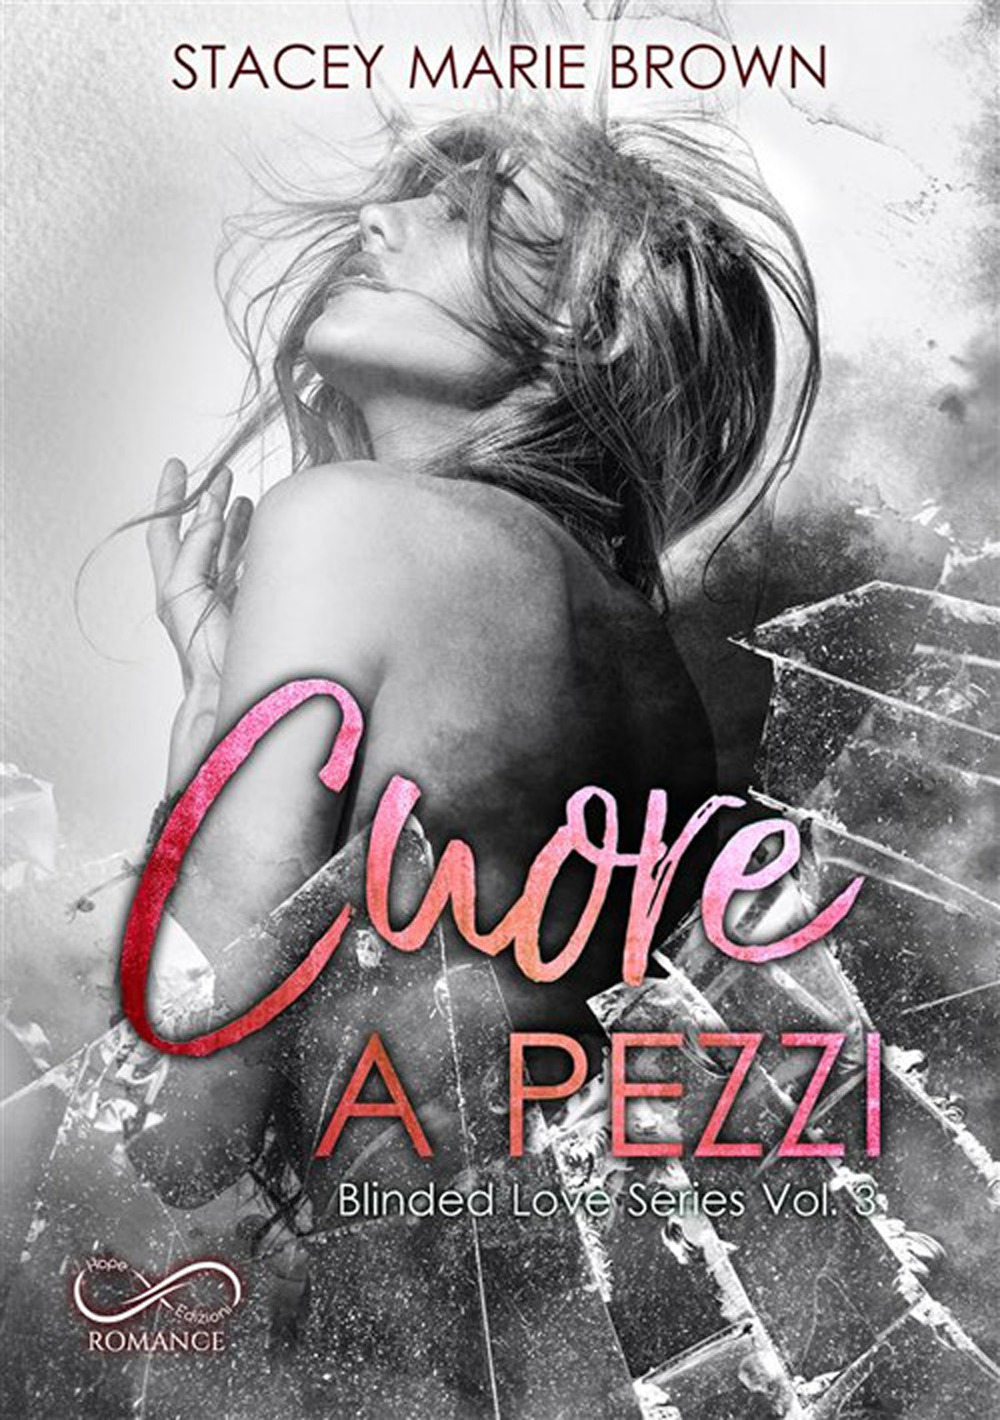 Cuore a pezzi. Blinded love. Vol. 3